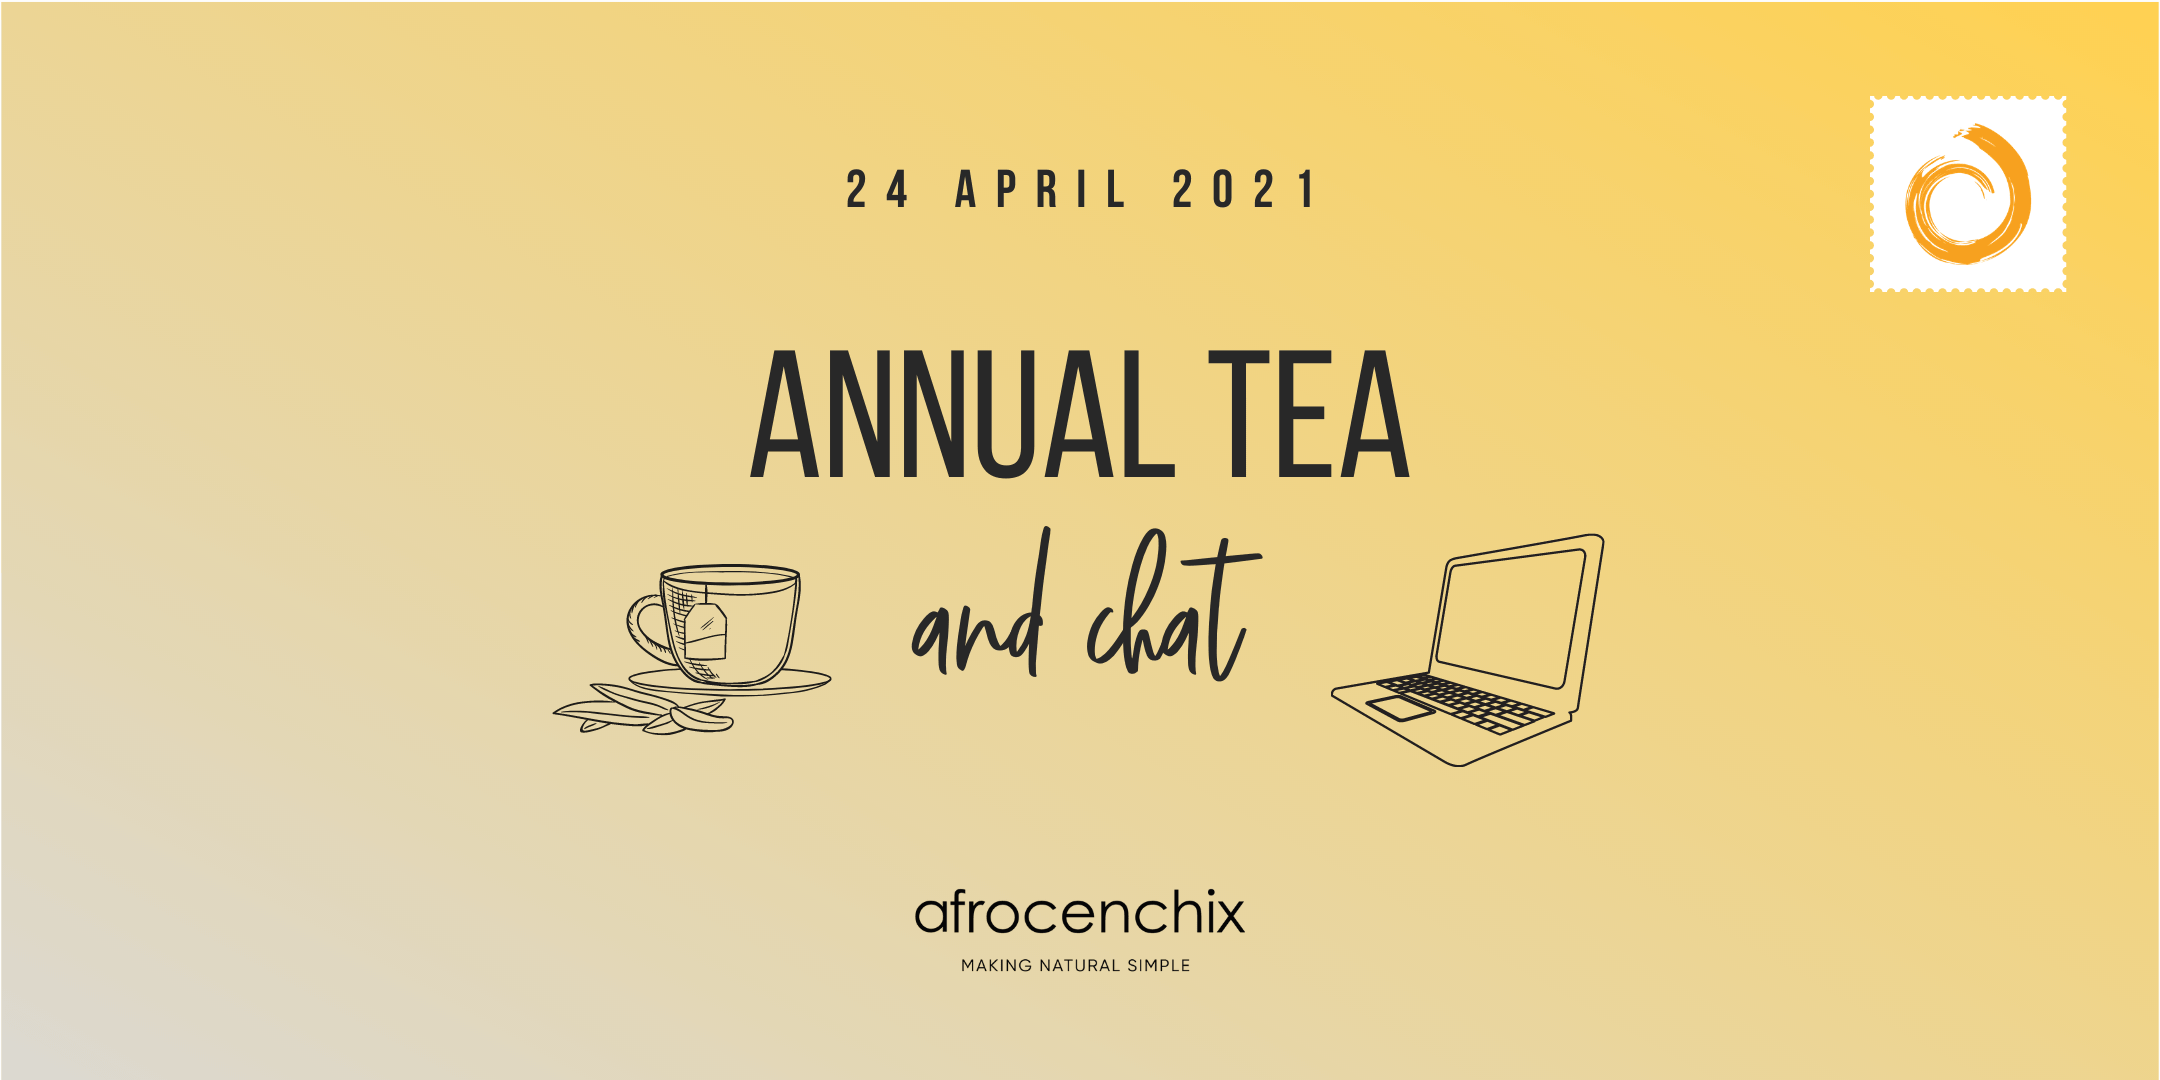 We're Hosting Our Annual Tea & Chat 2021 this April